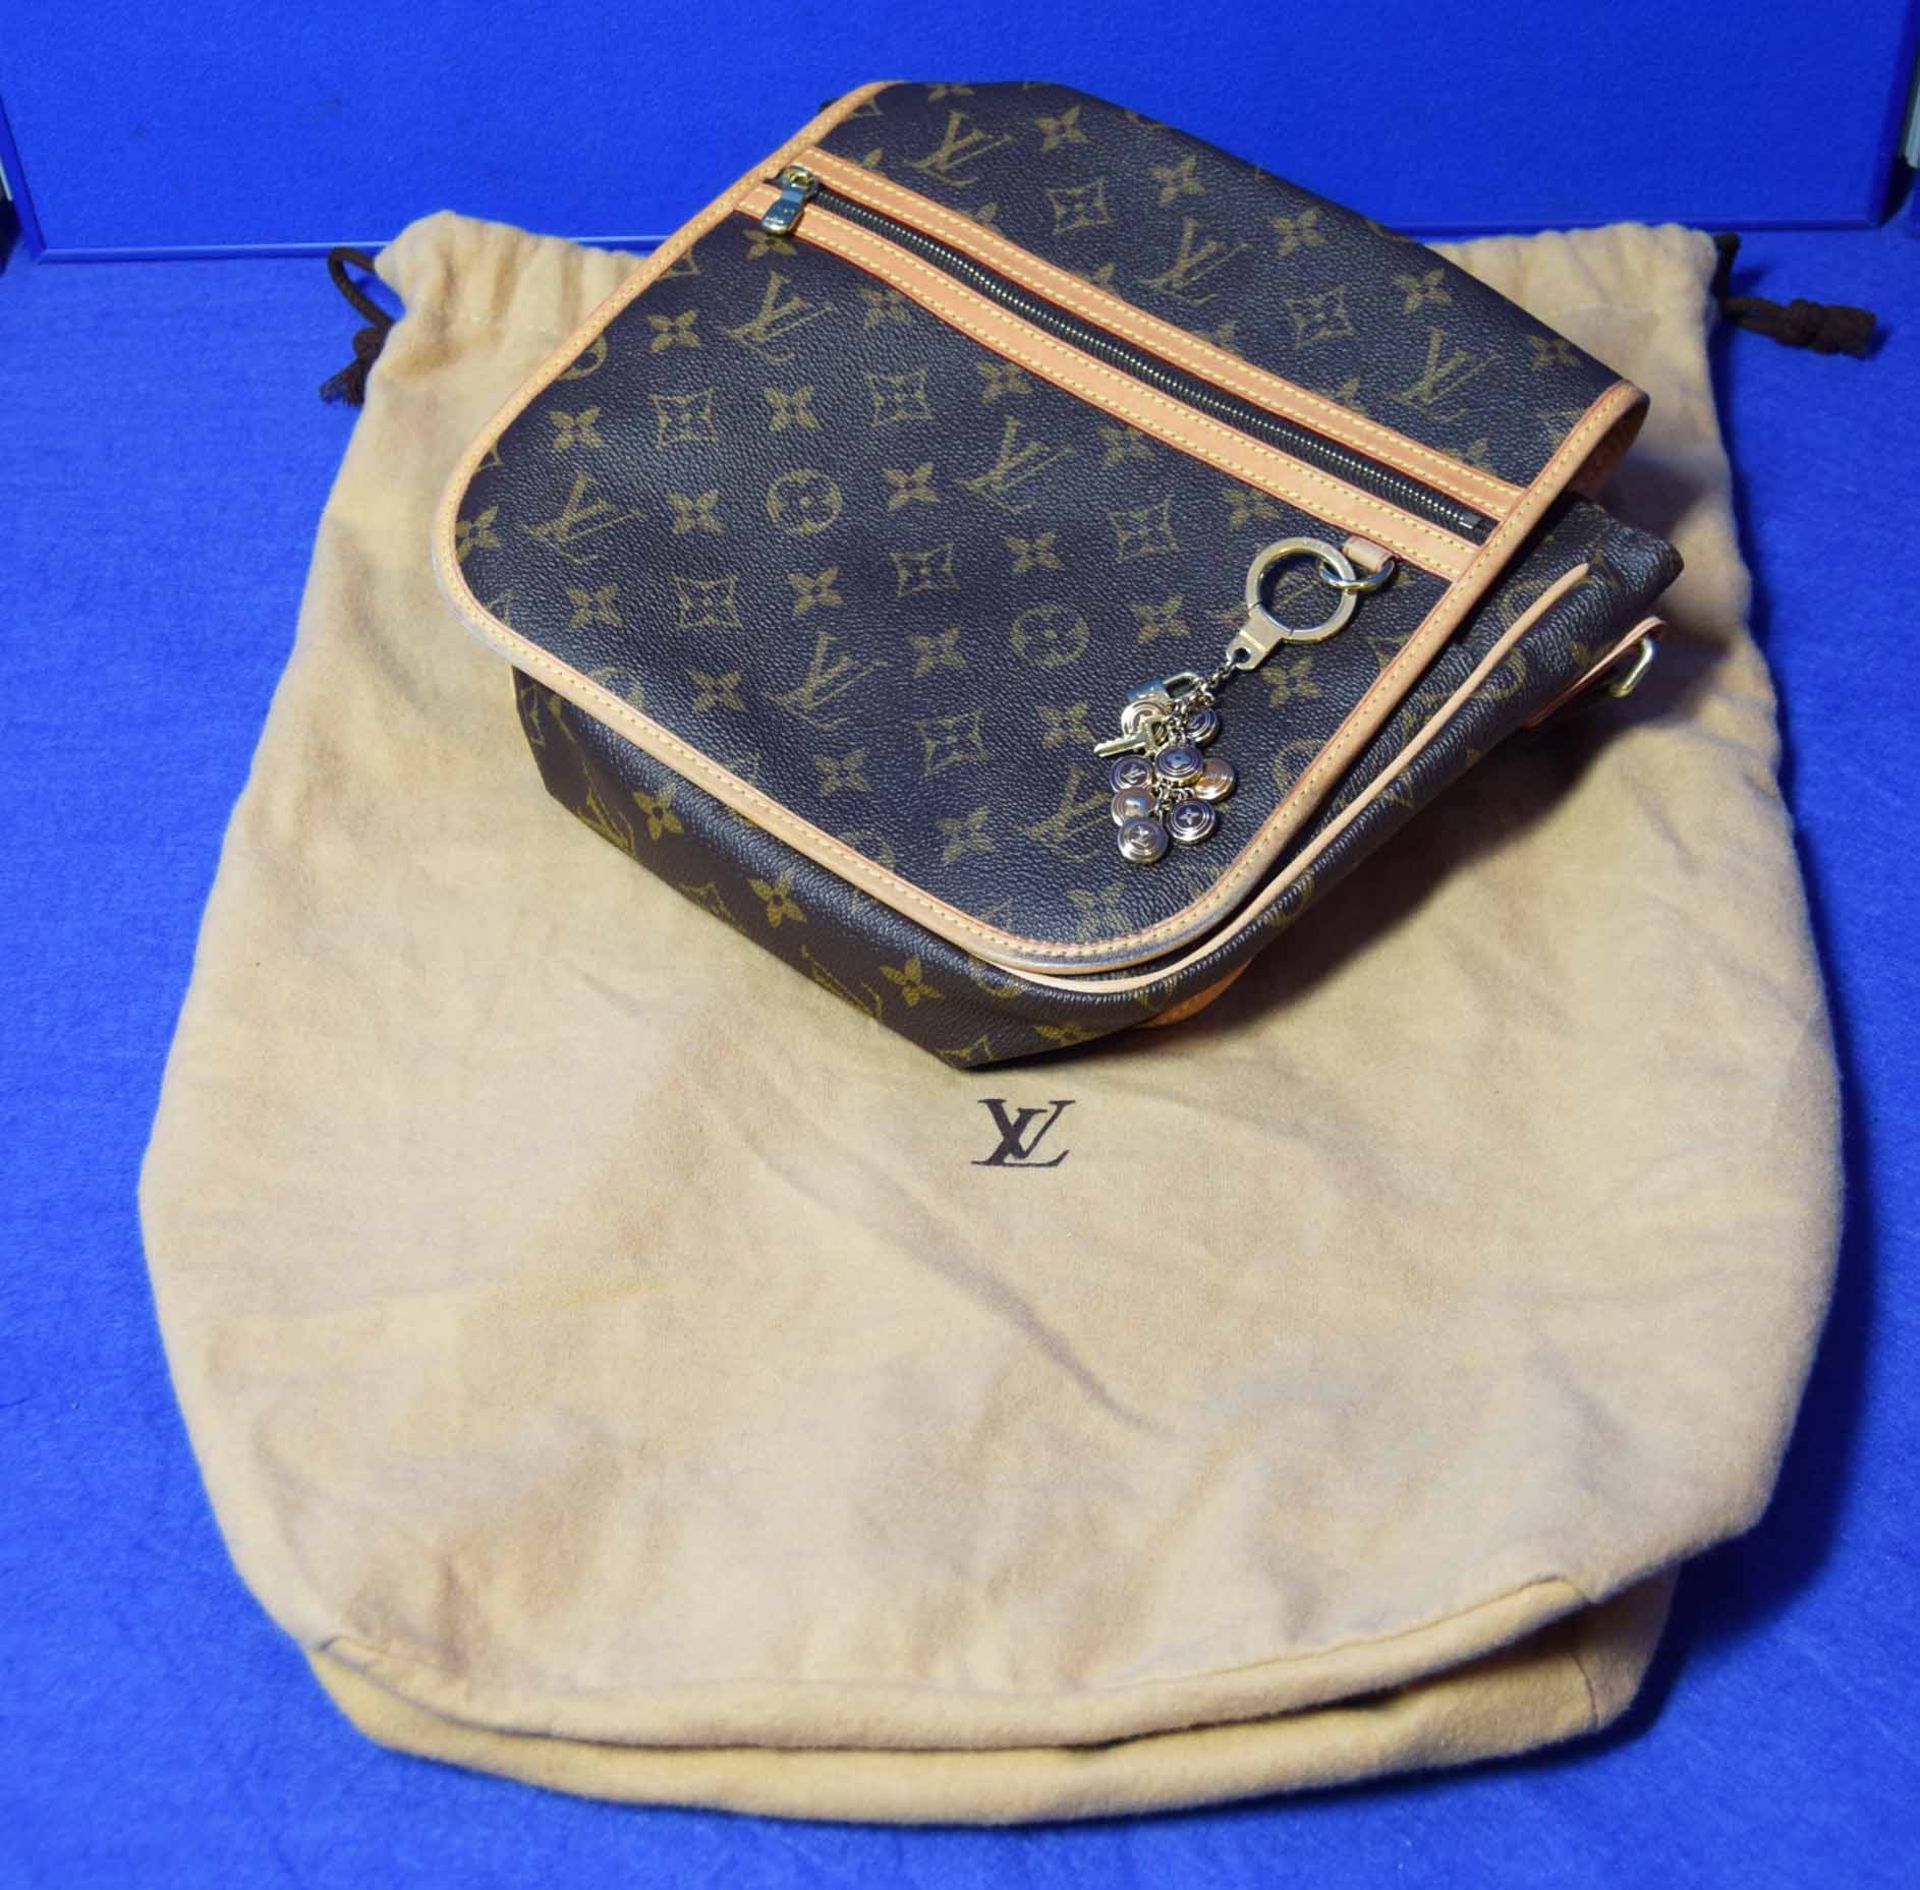 A LOUIS VUITTON Messenger Bosphore Cross Body Shoulder Bag in Chocolate Brown/Camel Leather with